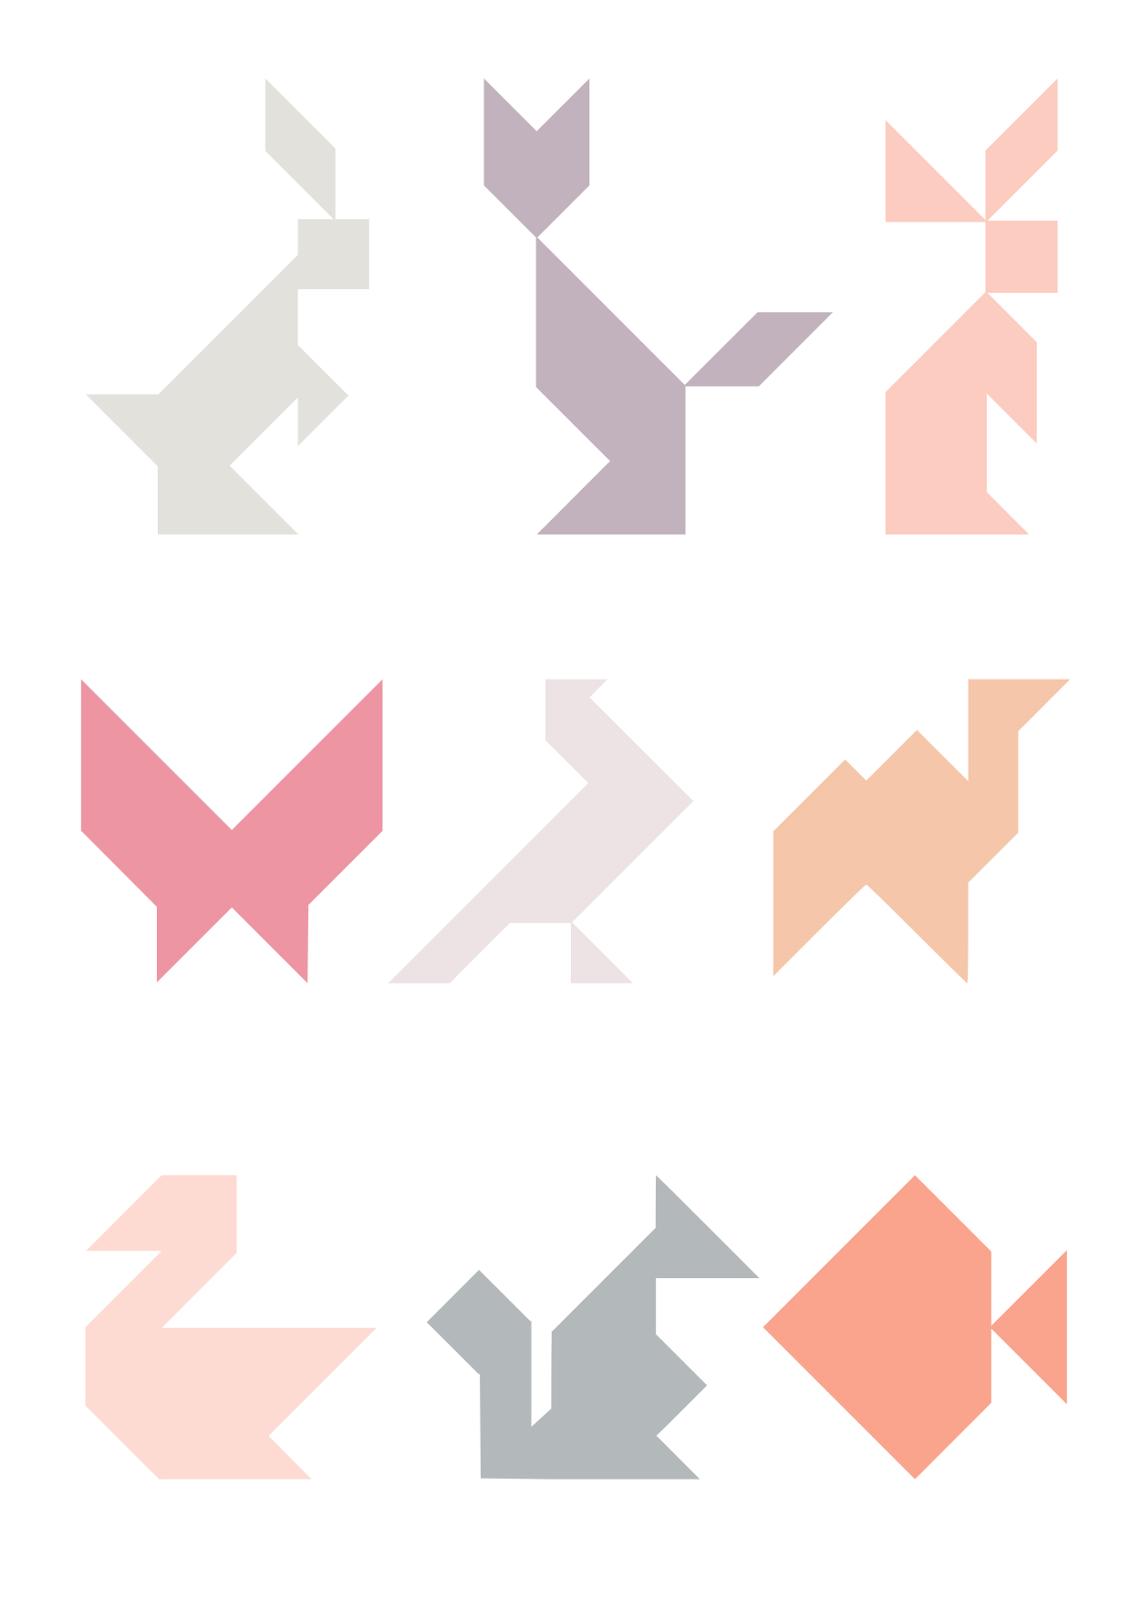 Tangram Pictures To Print 104